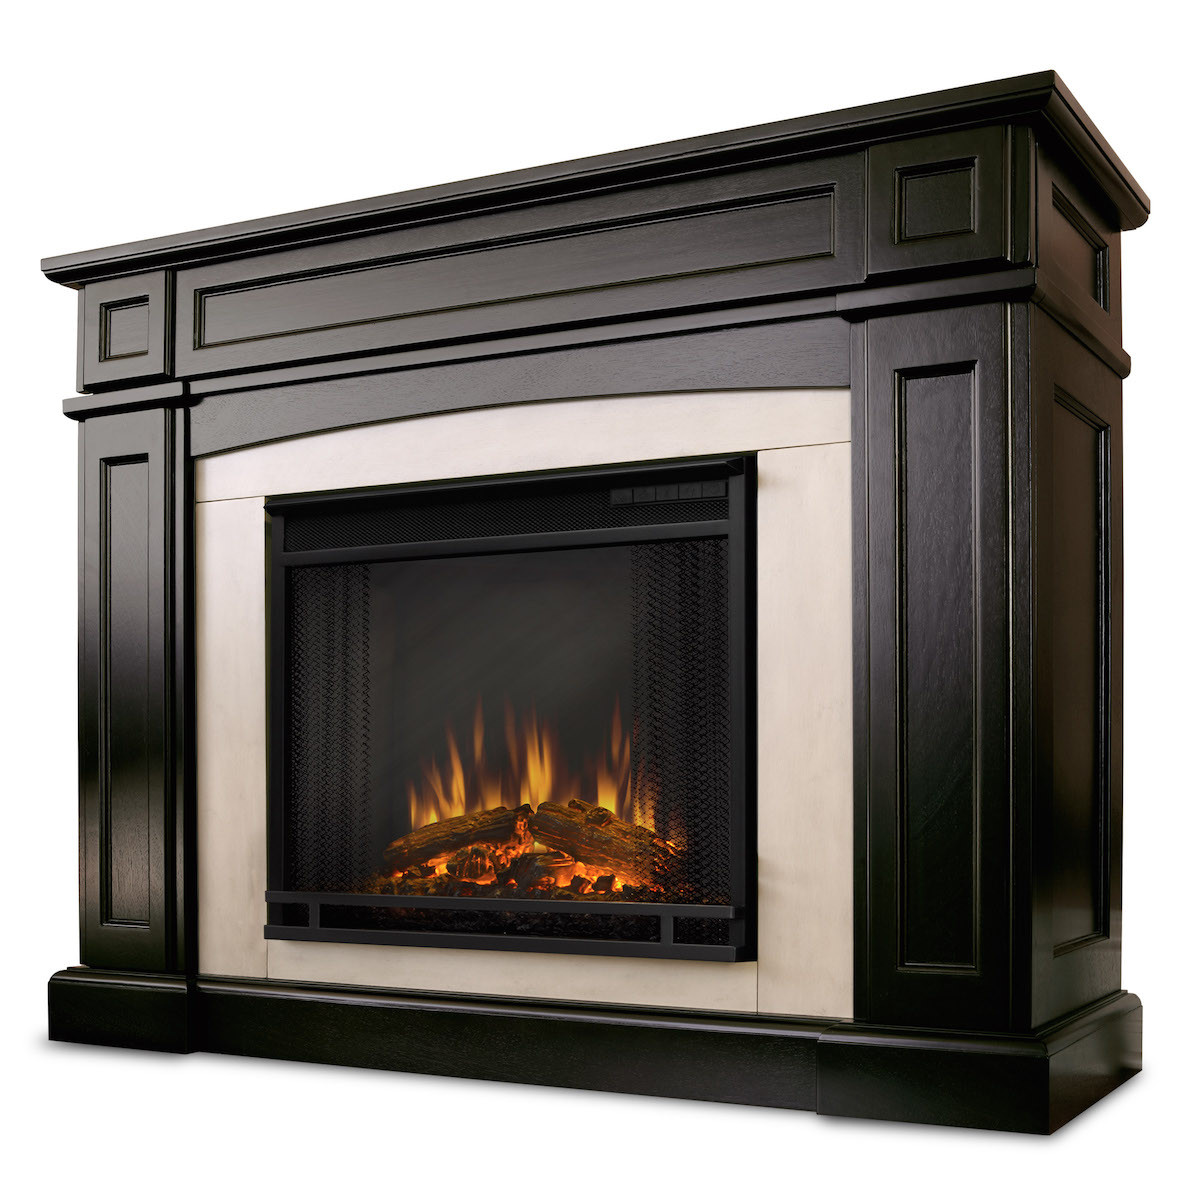 Walnut Electric Fireplace
 Real Flame Rutherford Electric Fireplace in Dark Walnut